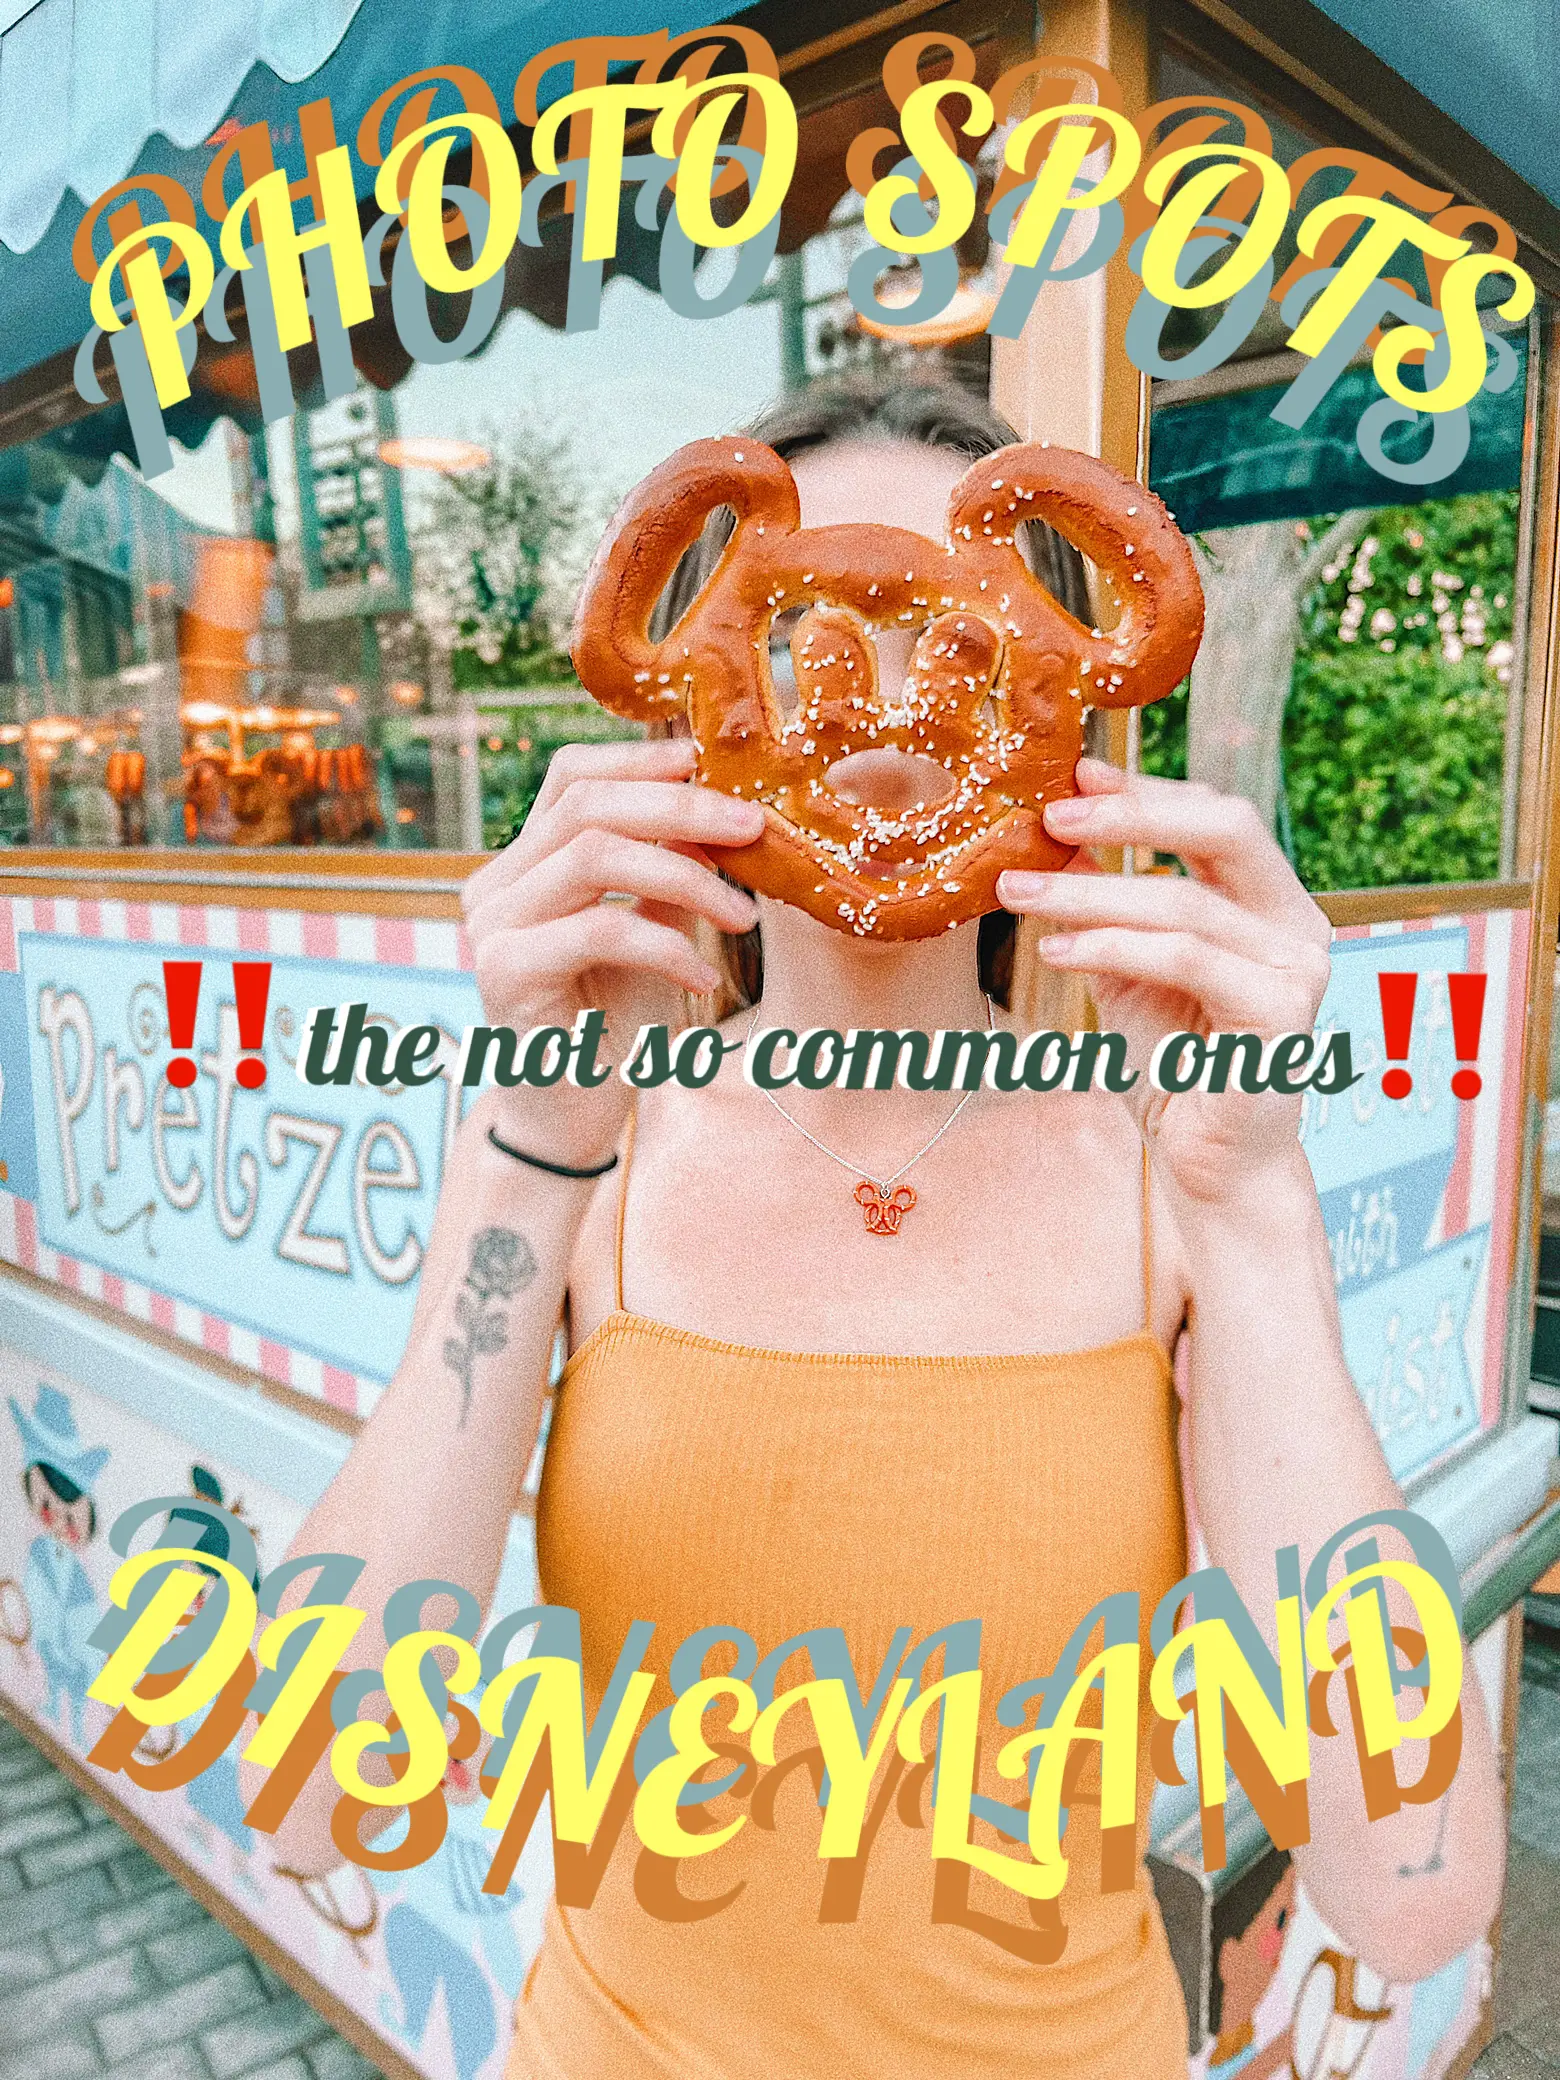  A person is holding a pretzel in front of a sign that says "Portland".